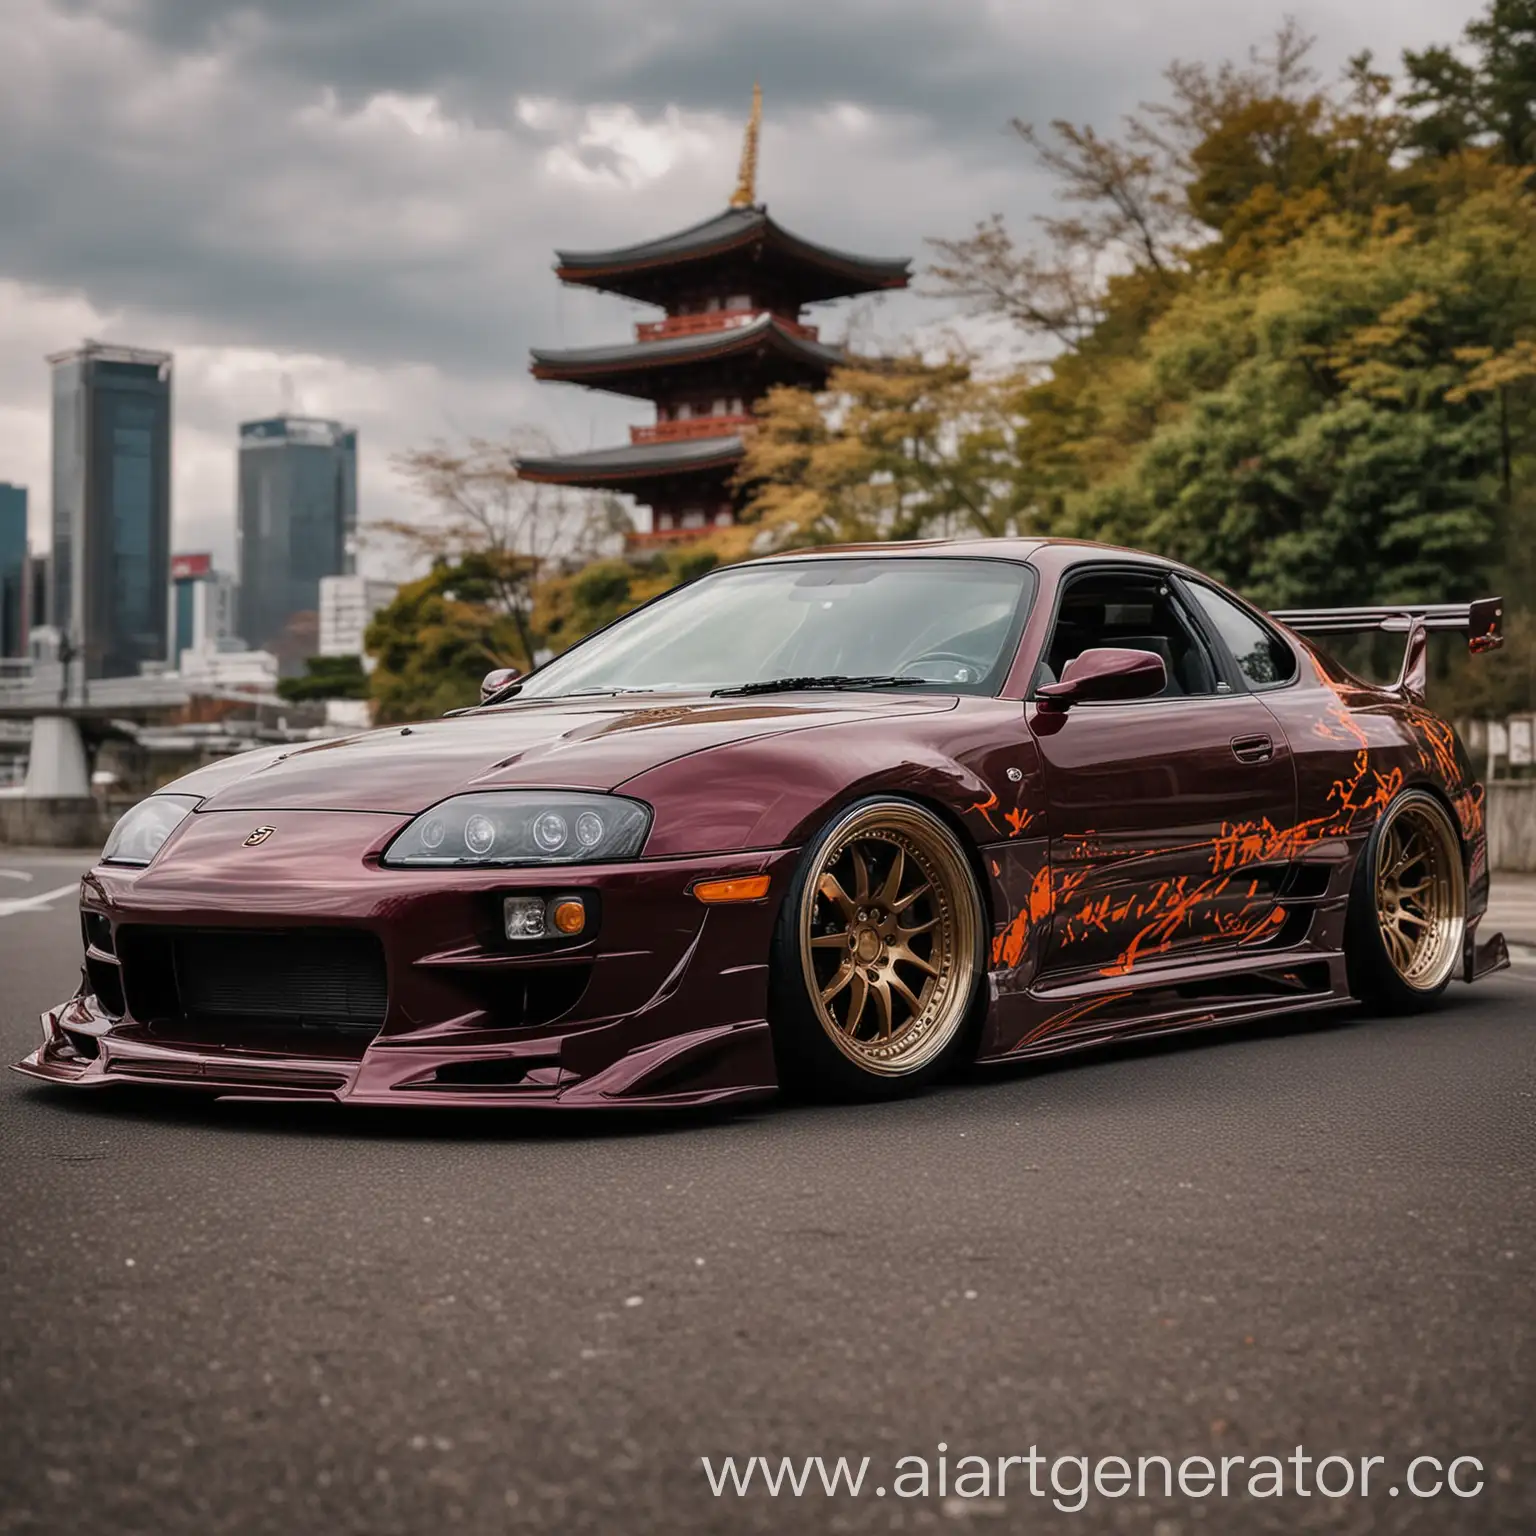 Tokyo-Style-Supra-MK4-with-Vinyl-and-Body-Kit-in-Vibrant-Japanese-Setting